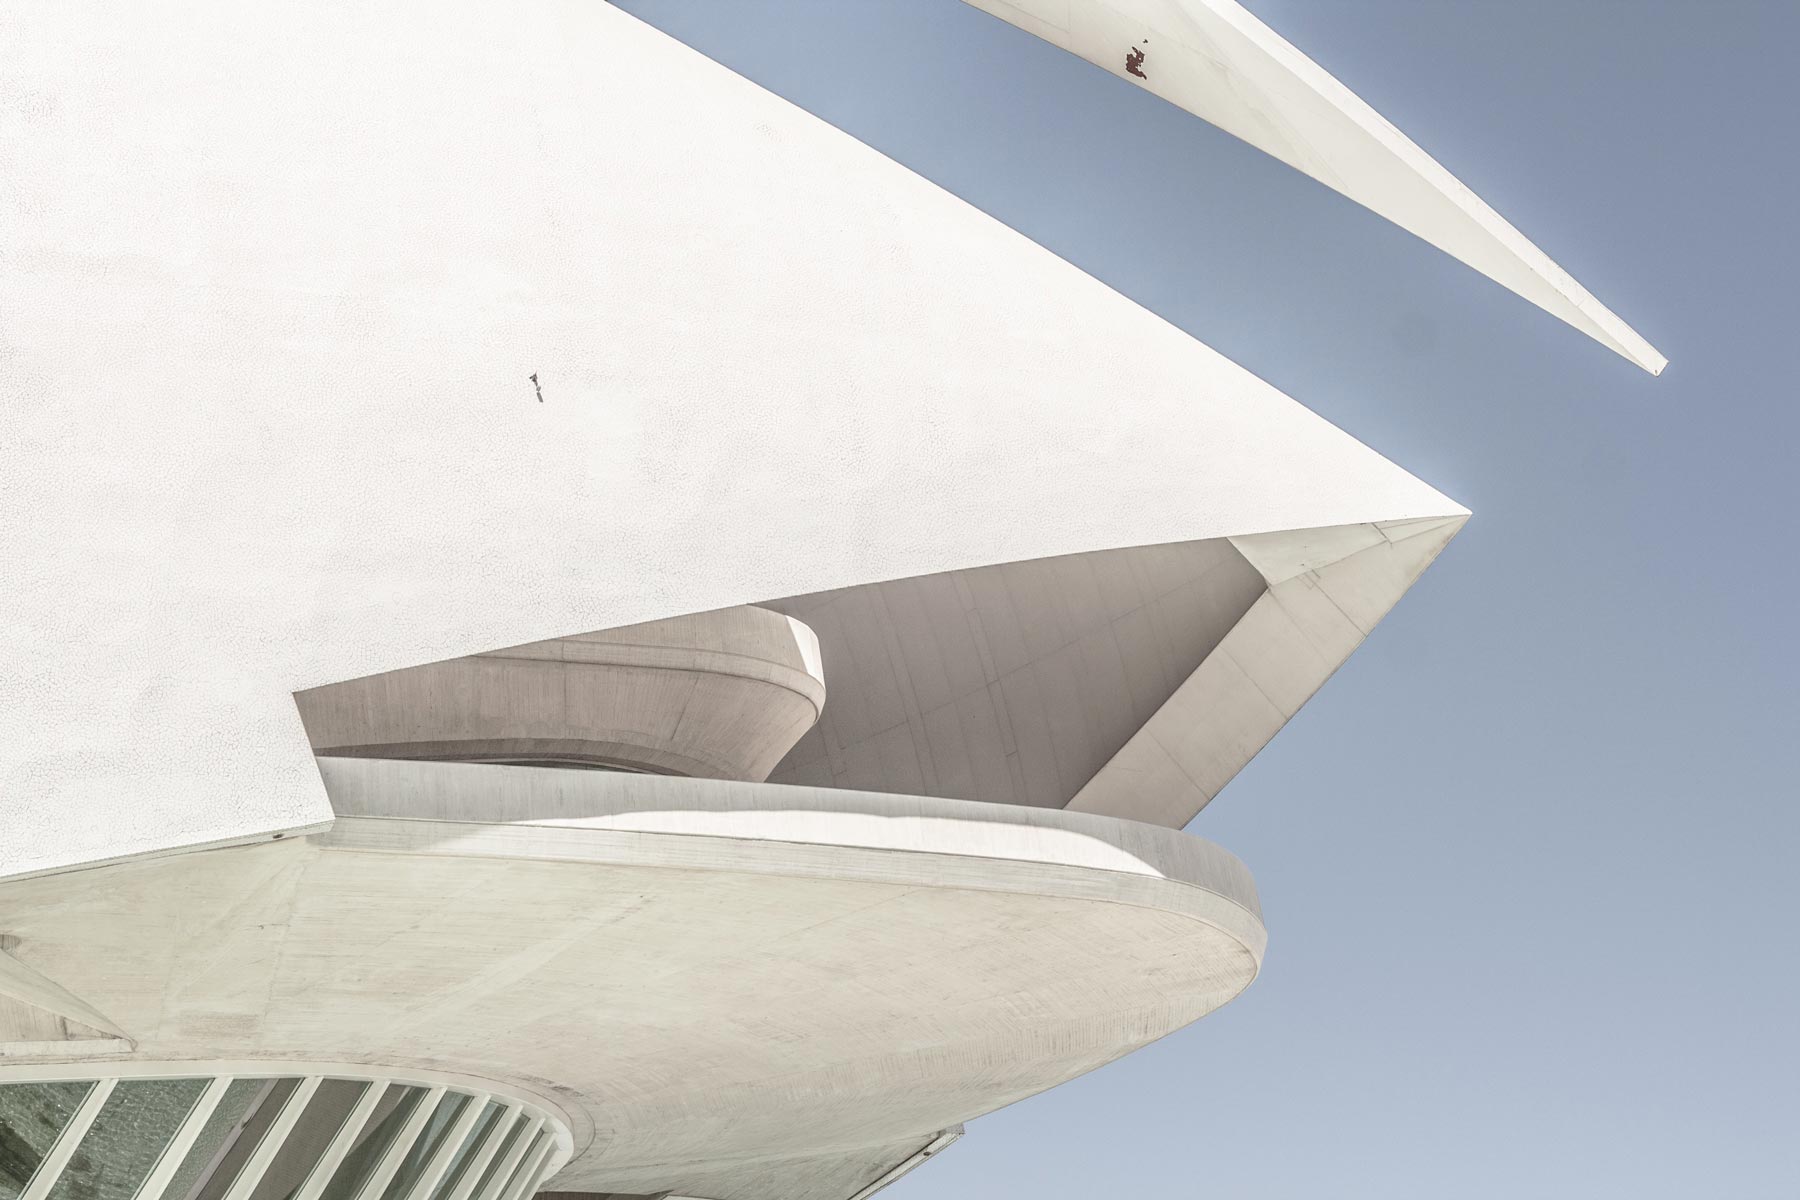 Close-up of the corner of a white, geometric building with both sharp points and round corners.